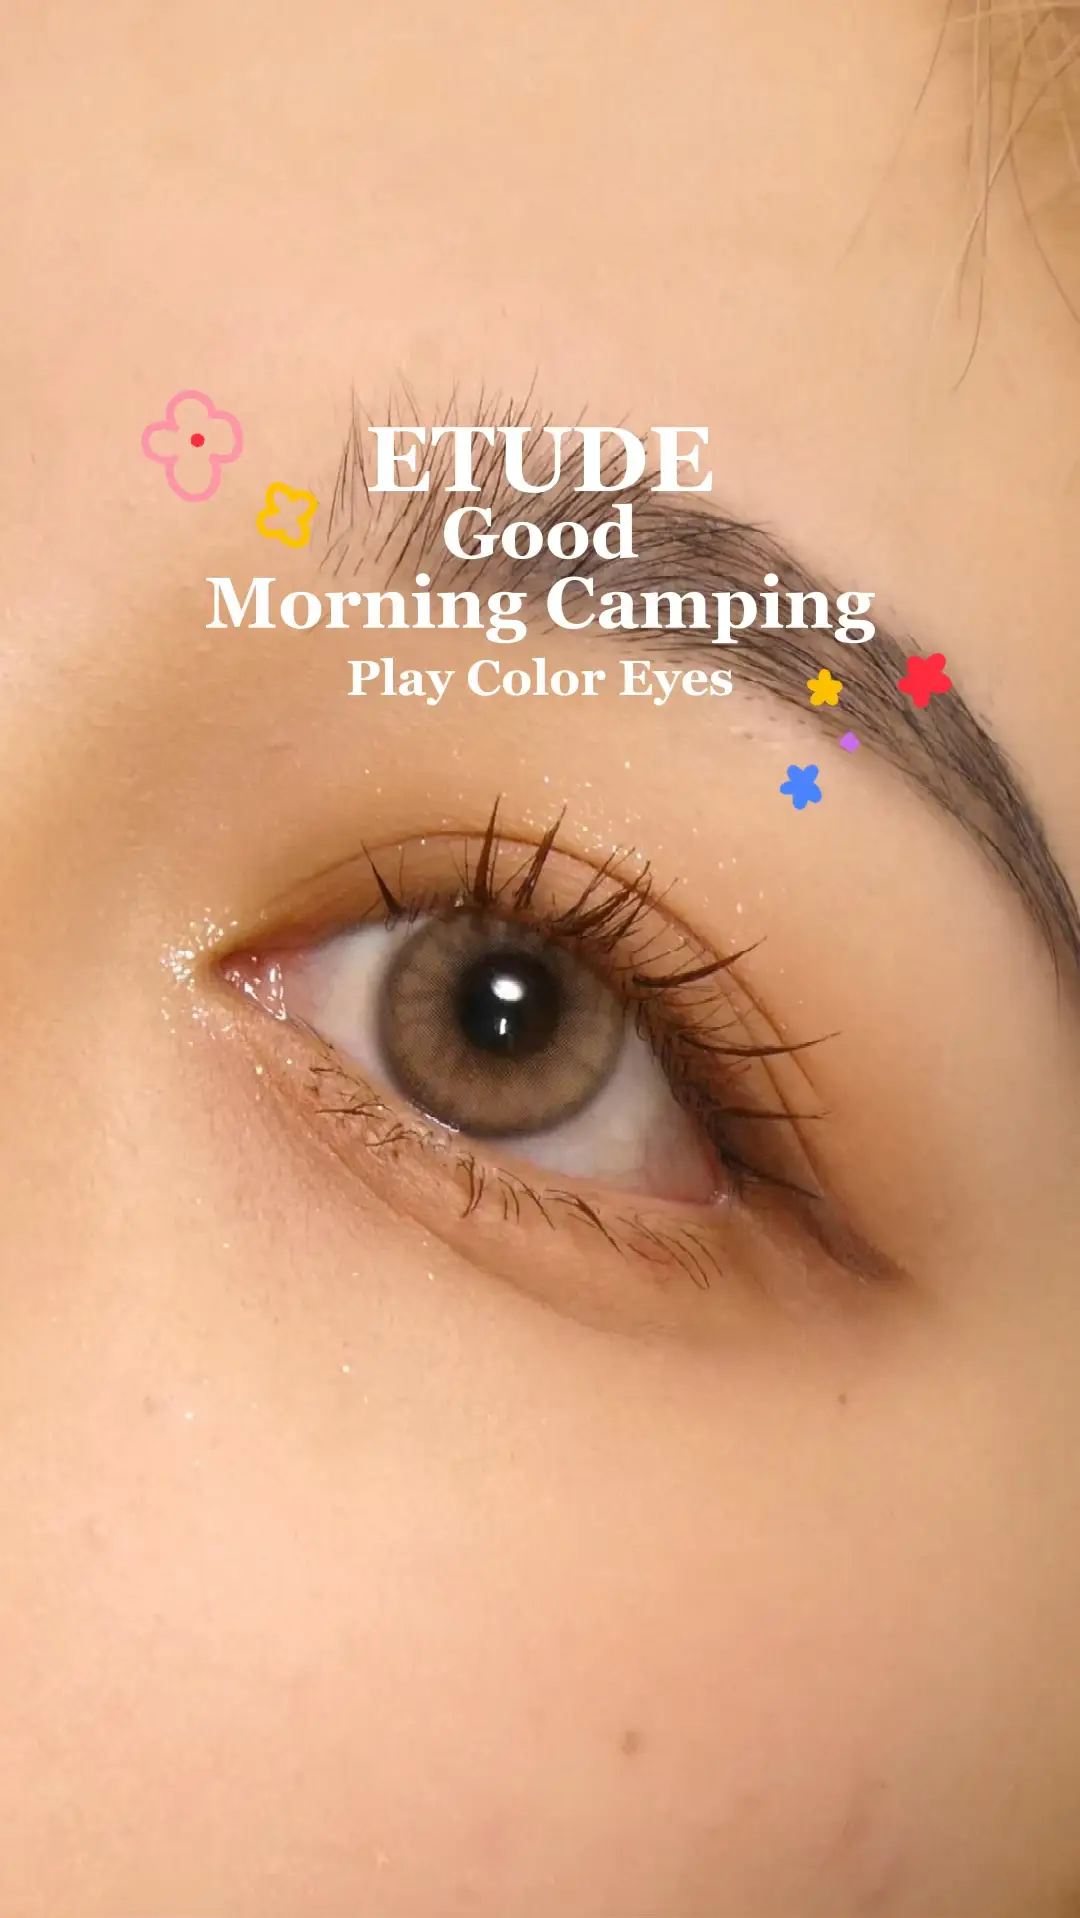 【ETUDE】Play Color Eyes -Good Morning Camping-👀🌼の画像 (1枚目)